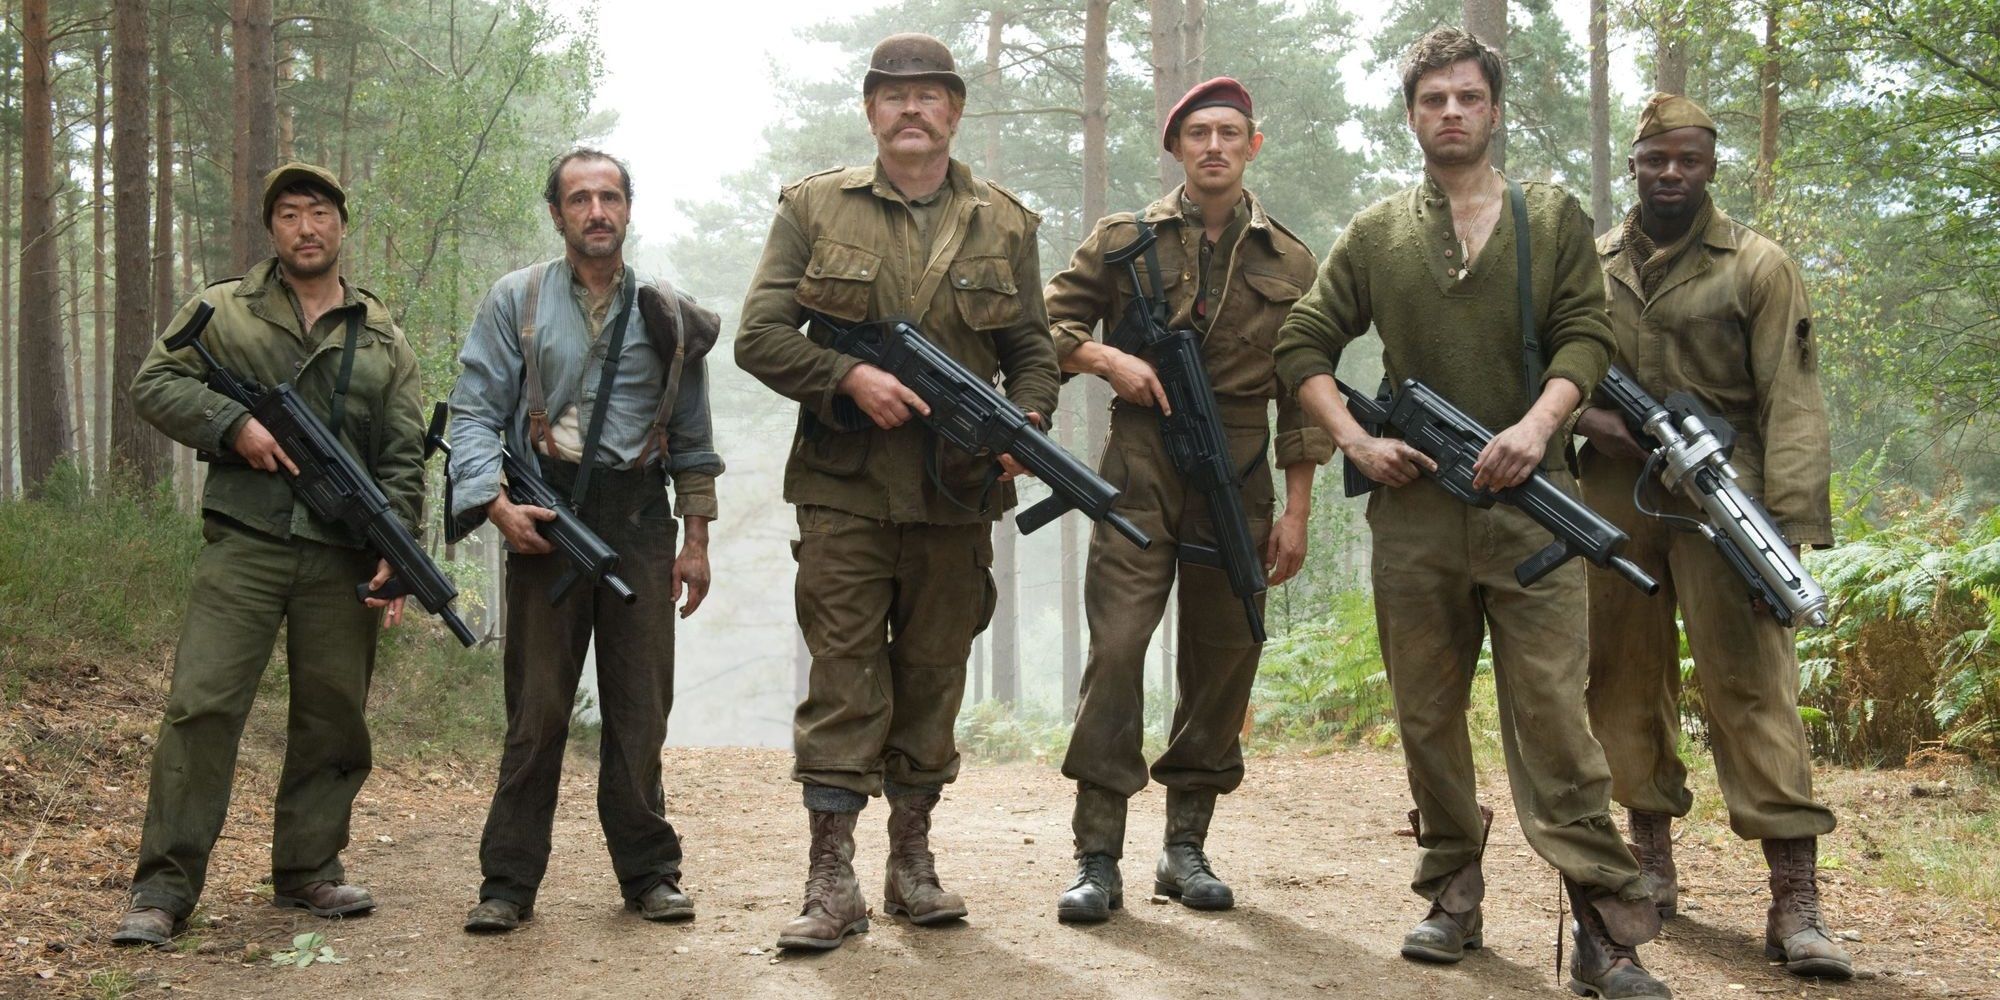 The Howling Commandos lined up in Captain America